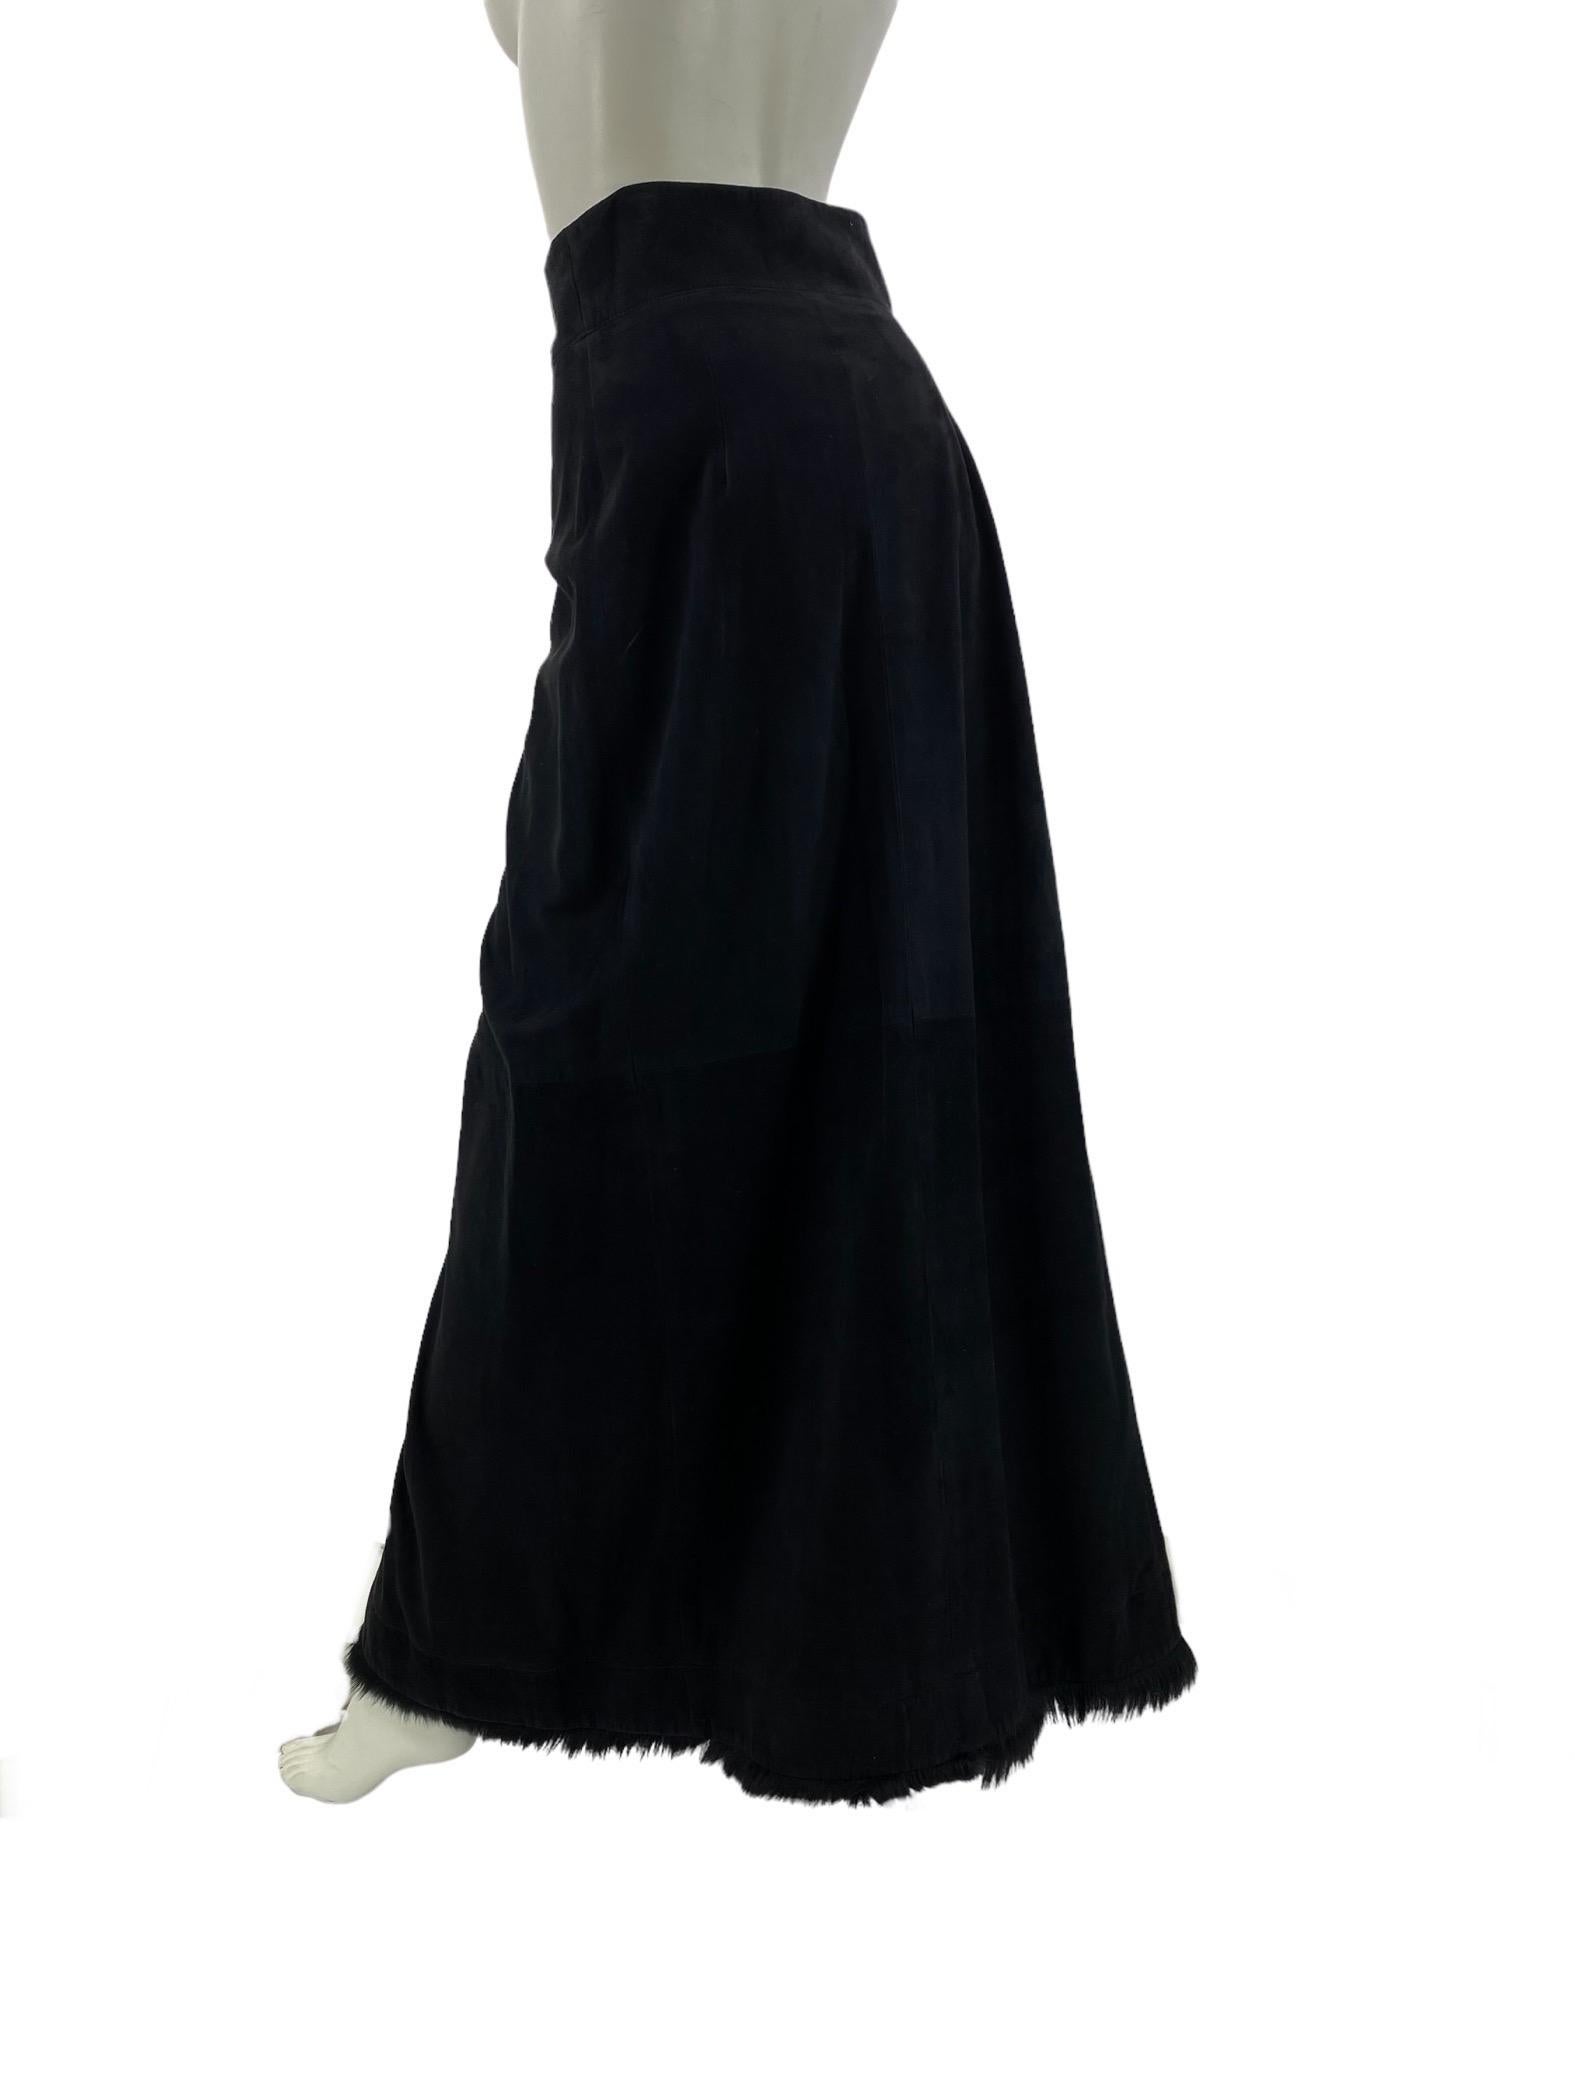 Women's Vintage 1996 Tom Ford for Gucci Black Suede Leather Long Wrap Skirt Fur Trim 42 For Sale